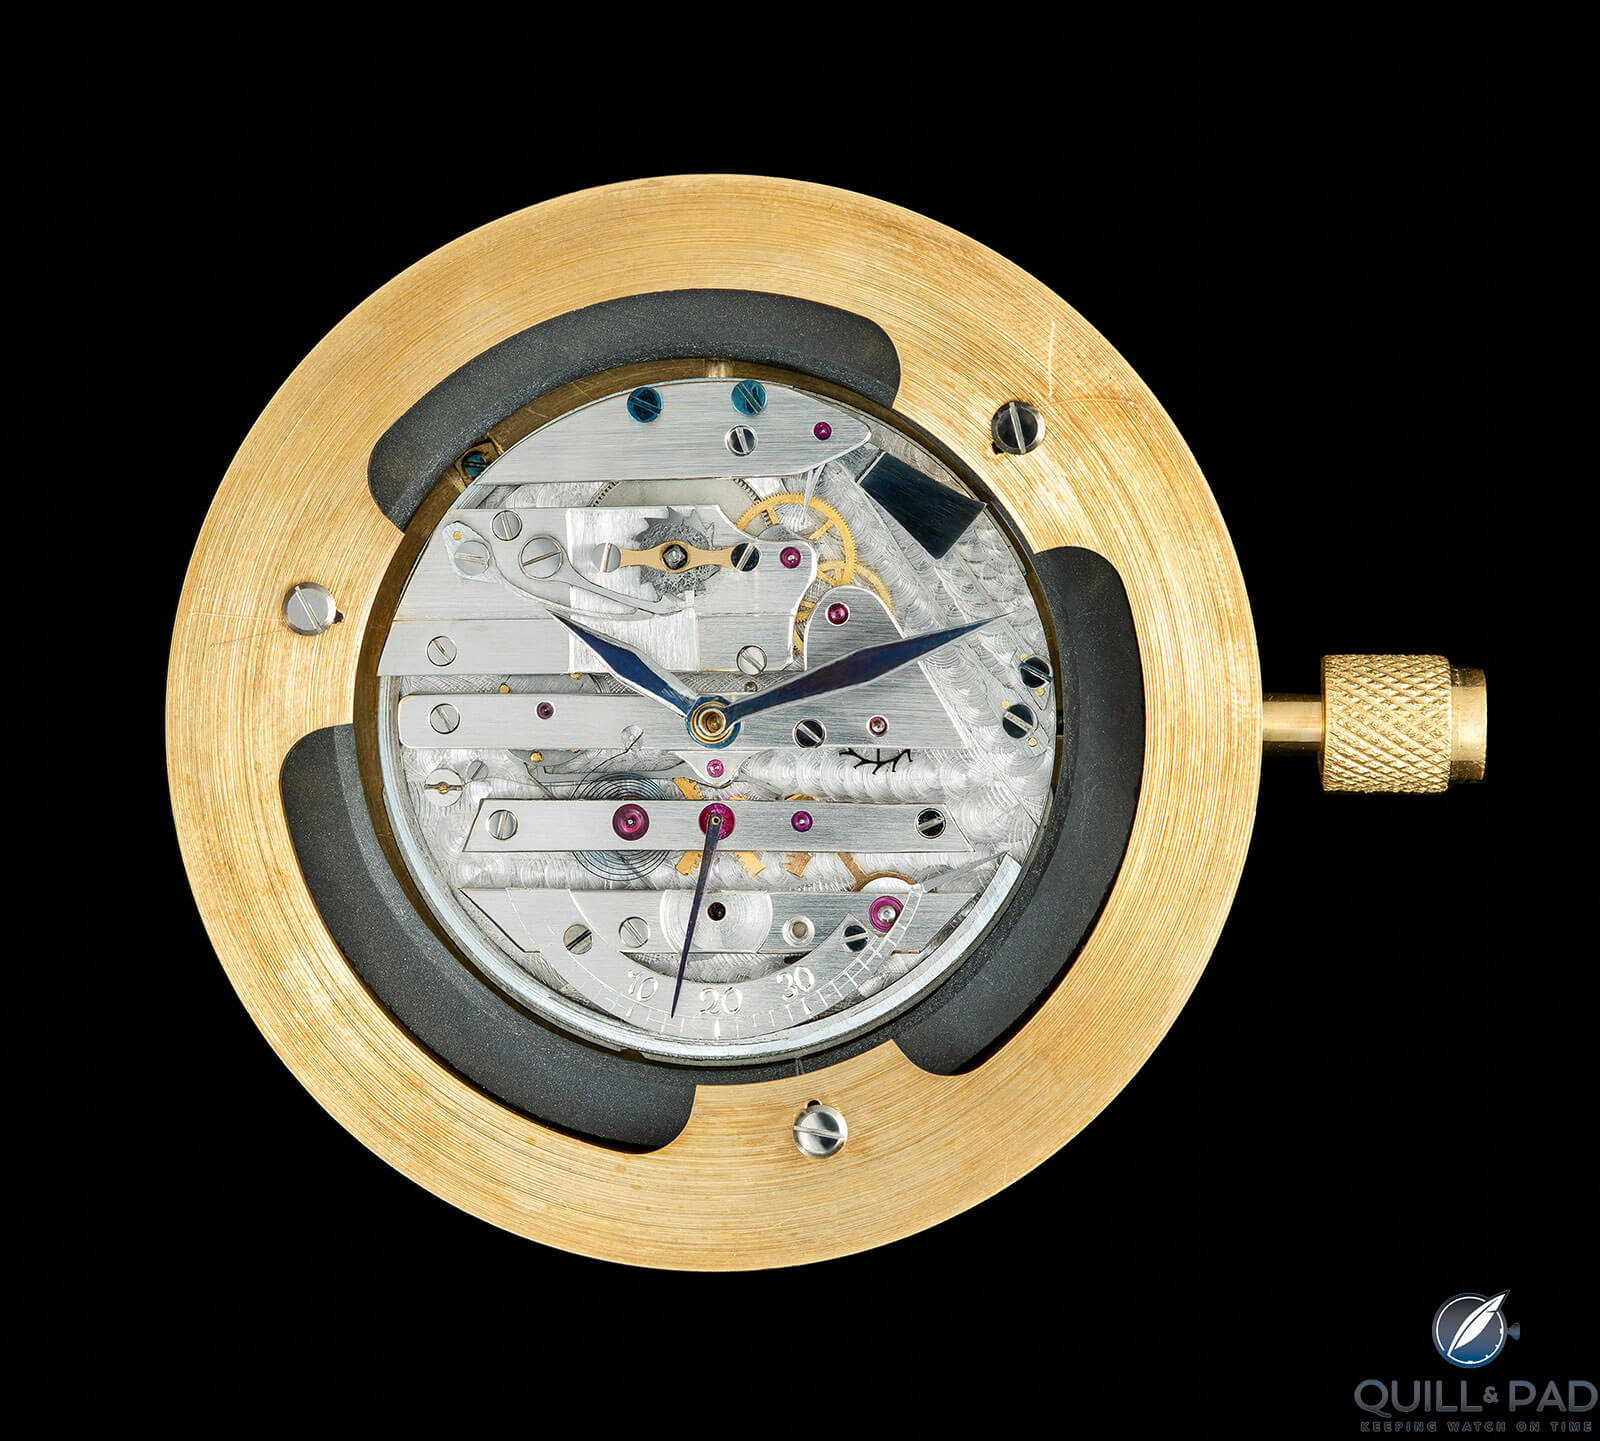 Yutaro Iizuka from Tokyo received a special commendation in the 2018 Walter Lange Watchmaking Excellence Awards